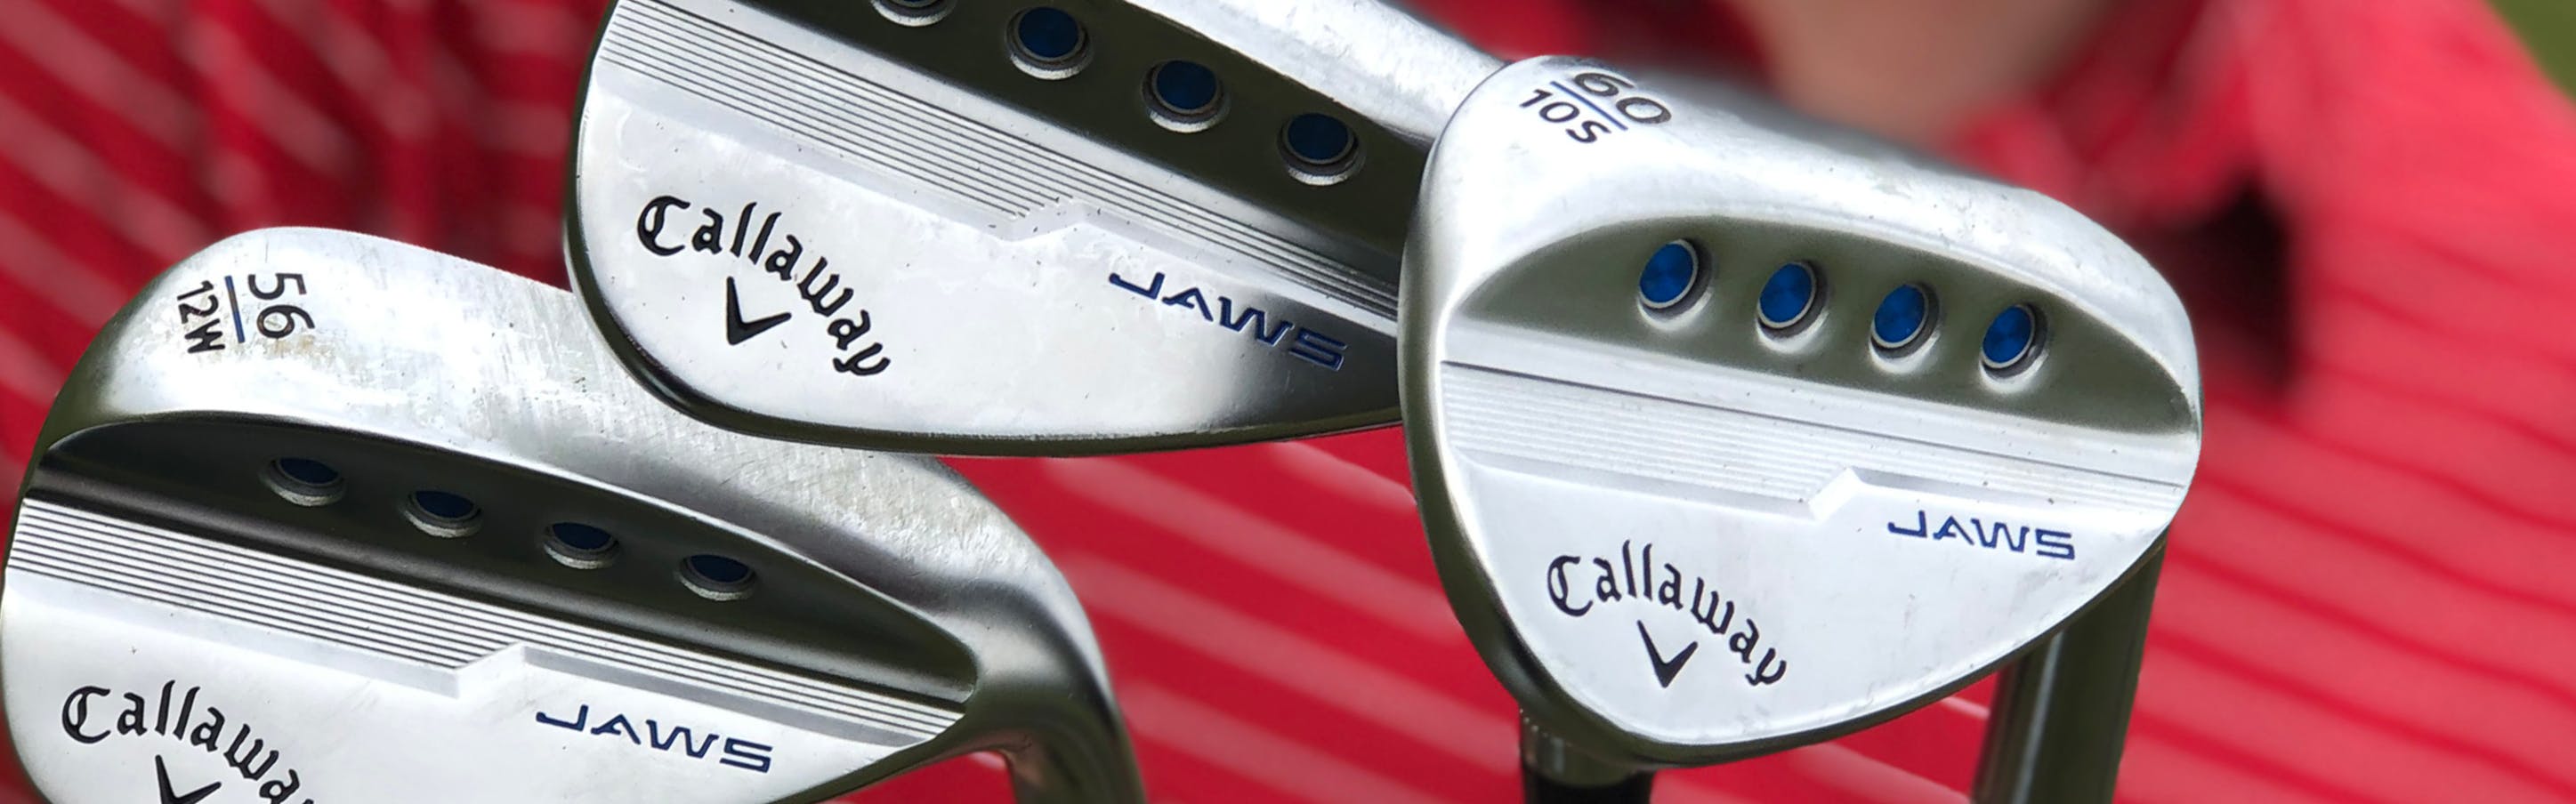 Expert Review: Callaway JAWS Wedges | Curated.com